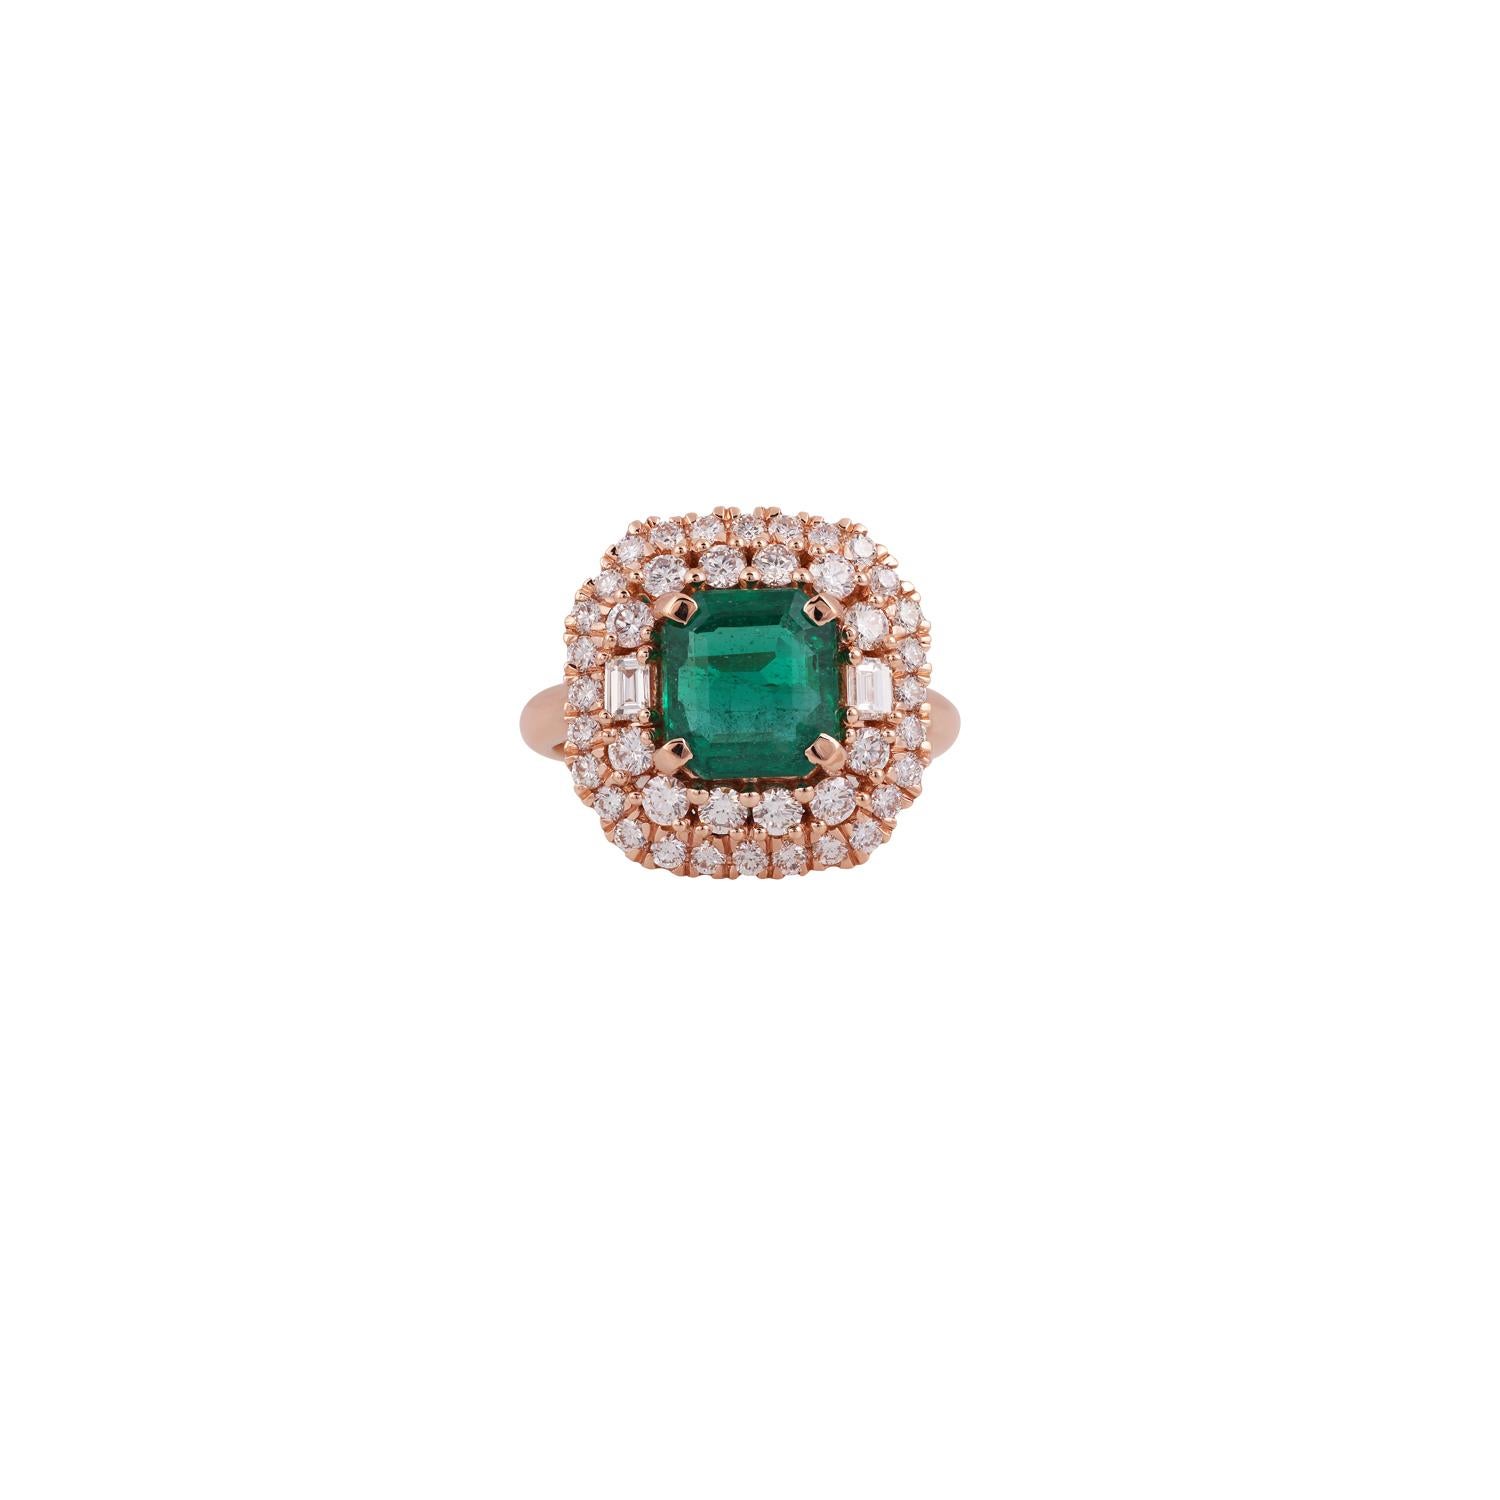 This is an elegant emerald & diamond ring studded in 18k Rose gold with 1 piece of  Zambian emerald weight 2.43 carat which is surrounded by 42 pieces of diamonds weight 1.10 carat, this entire ring studded in 18k Rose  gold.



 Ring size can be